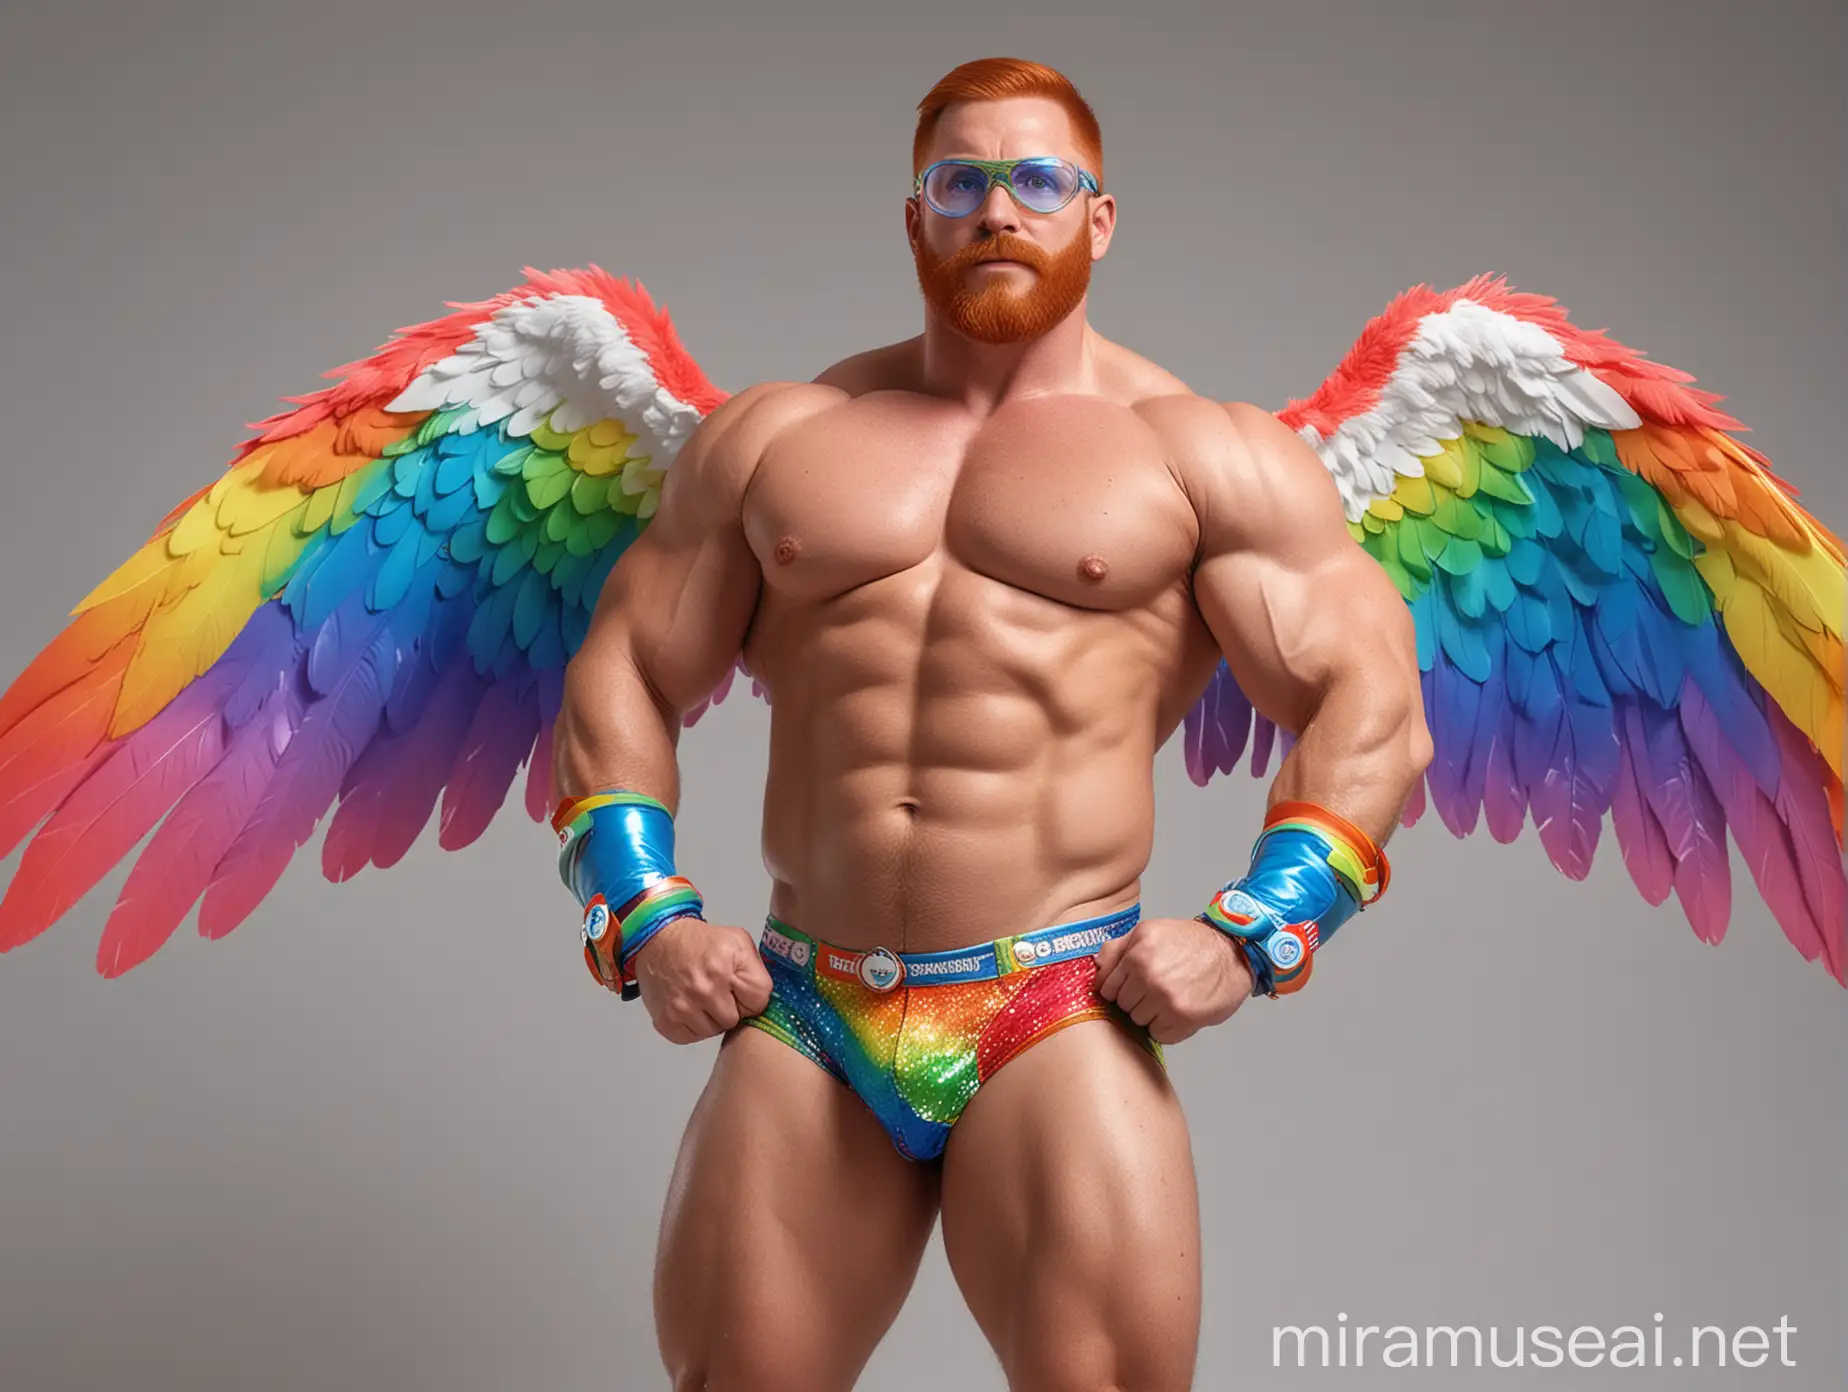 Colorful Bodybuilder Flexing with Rainbow Eagle Wings Jacket and Doraemon Goggles